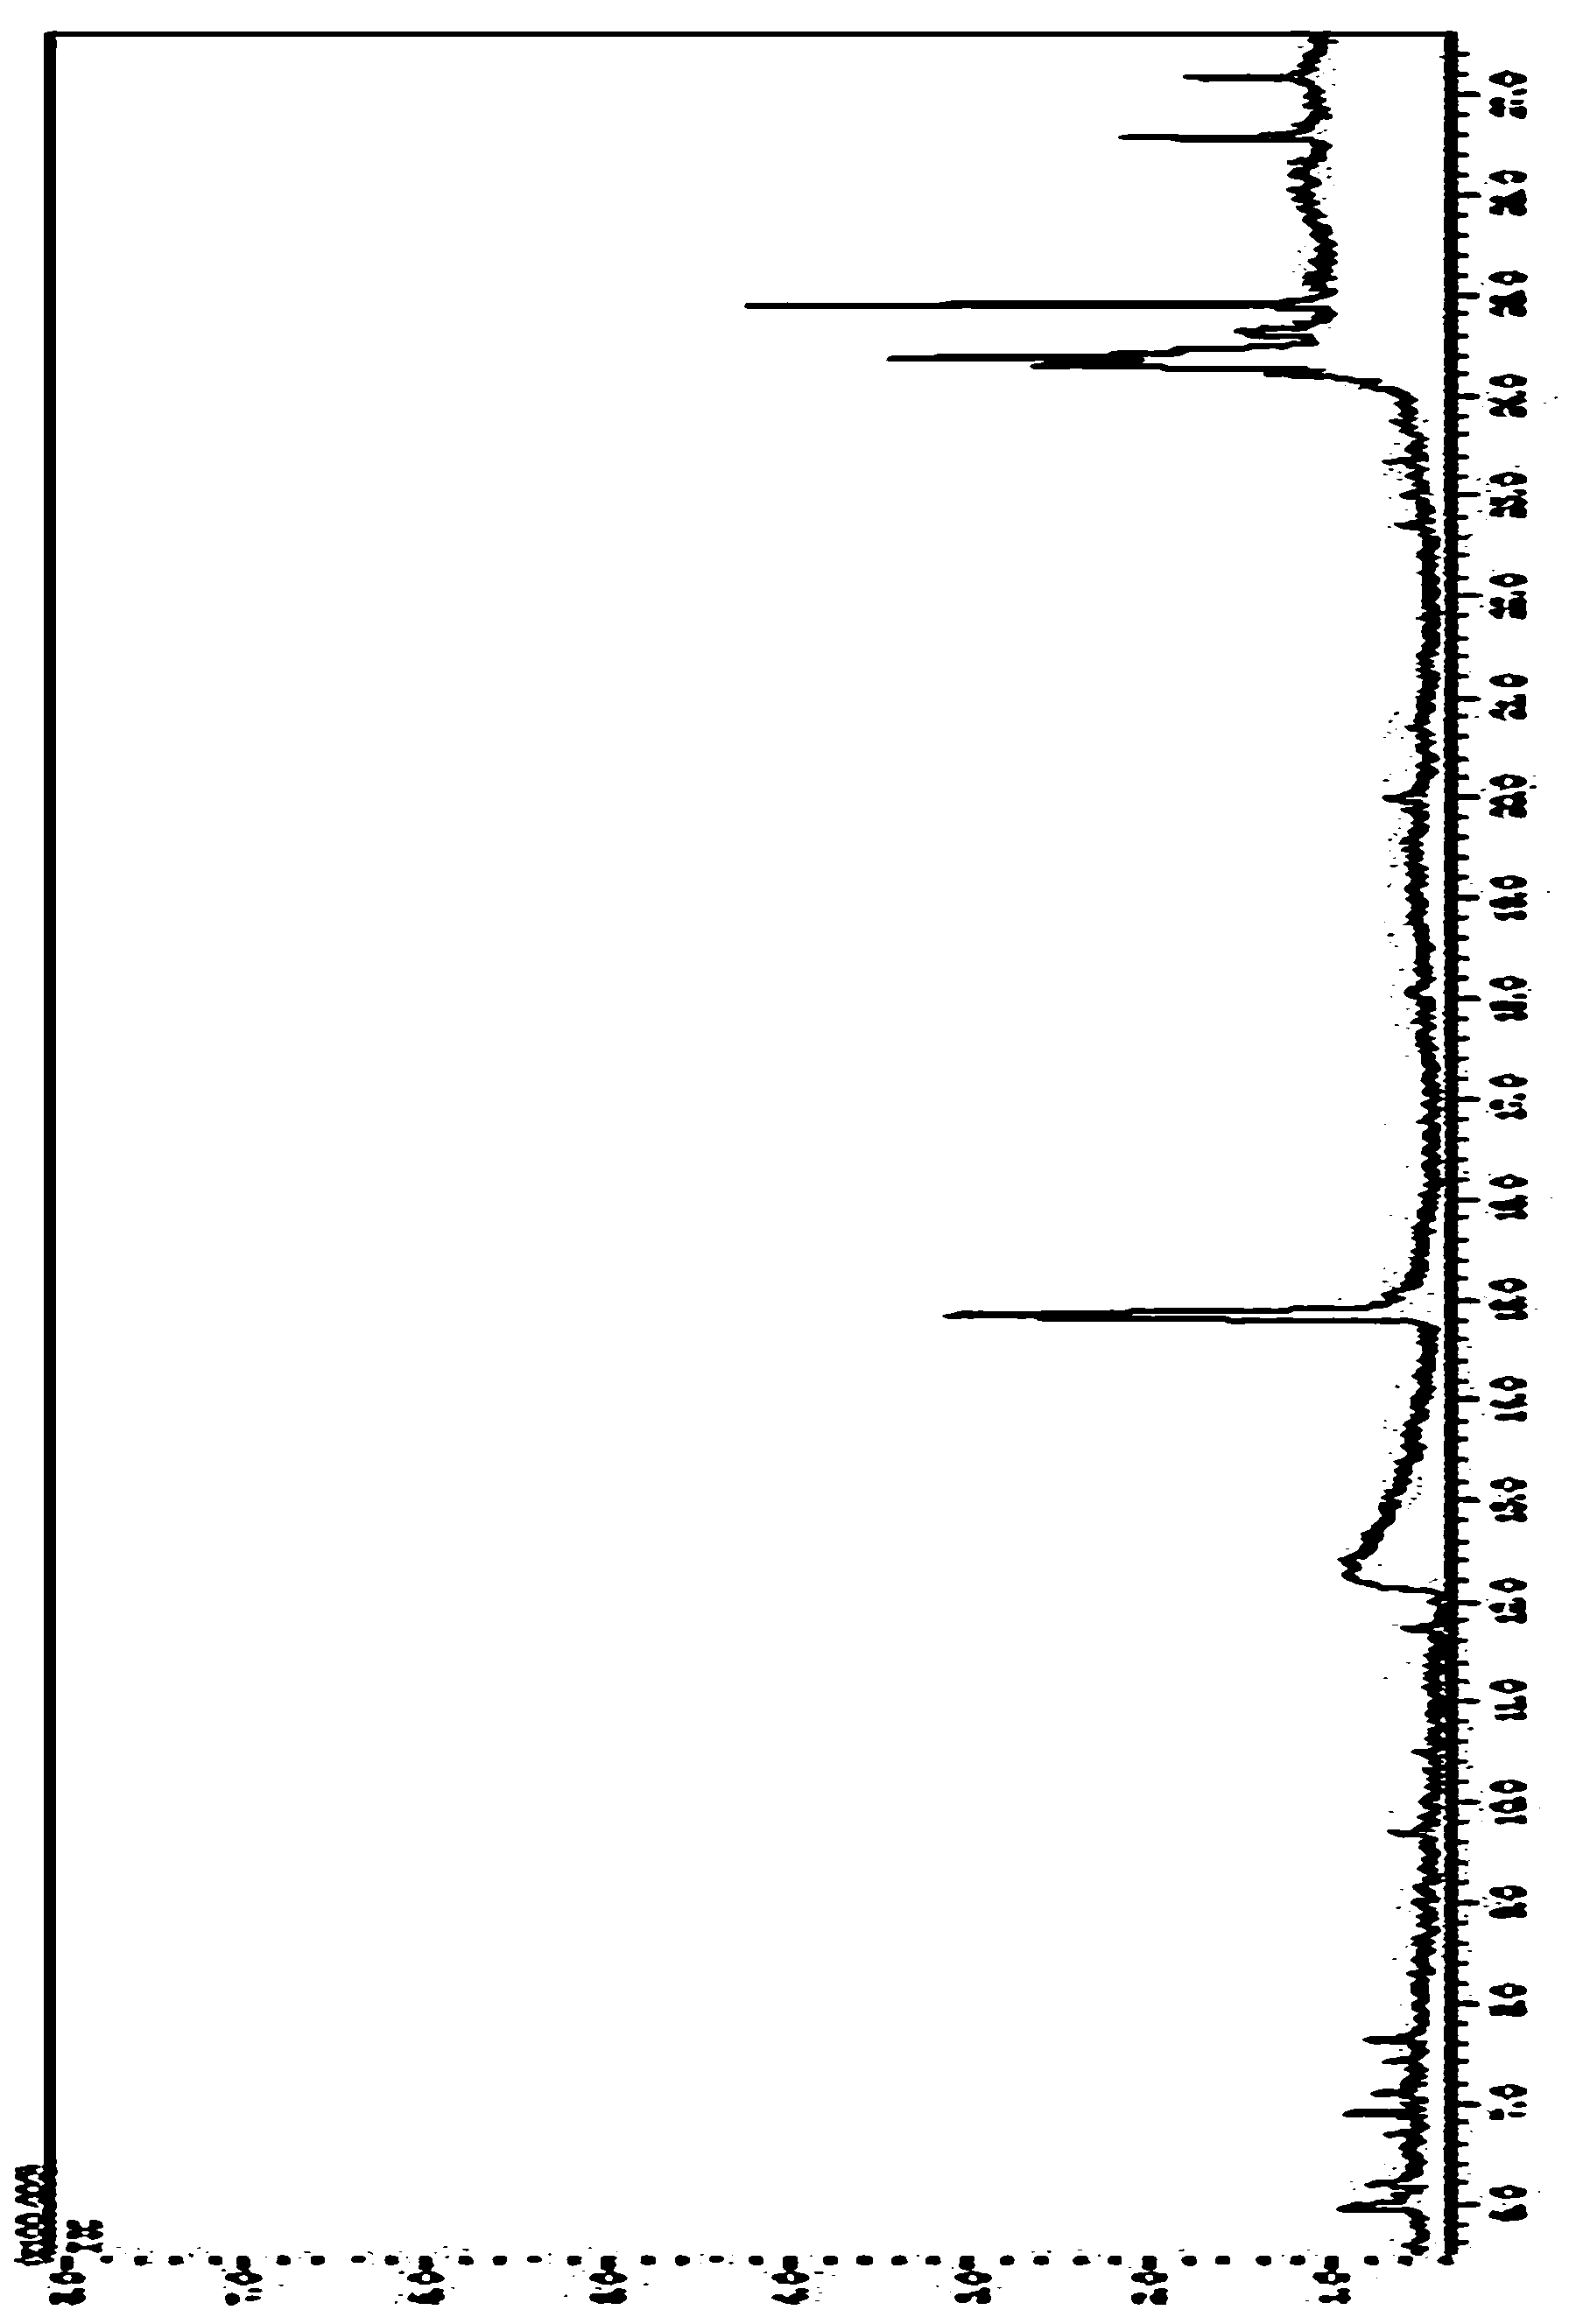 Method for determining content of saccharide components in ixeri sonhifolia injection